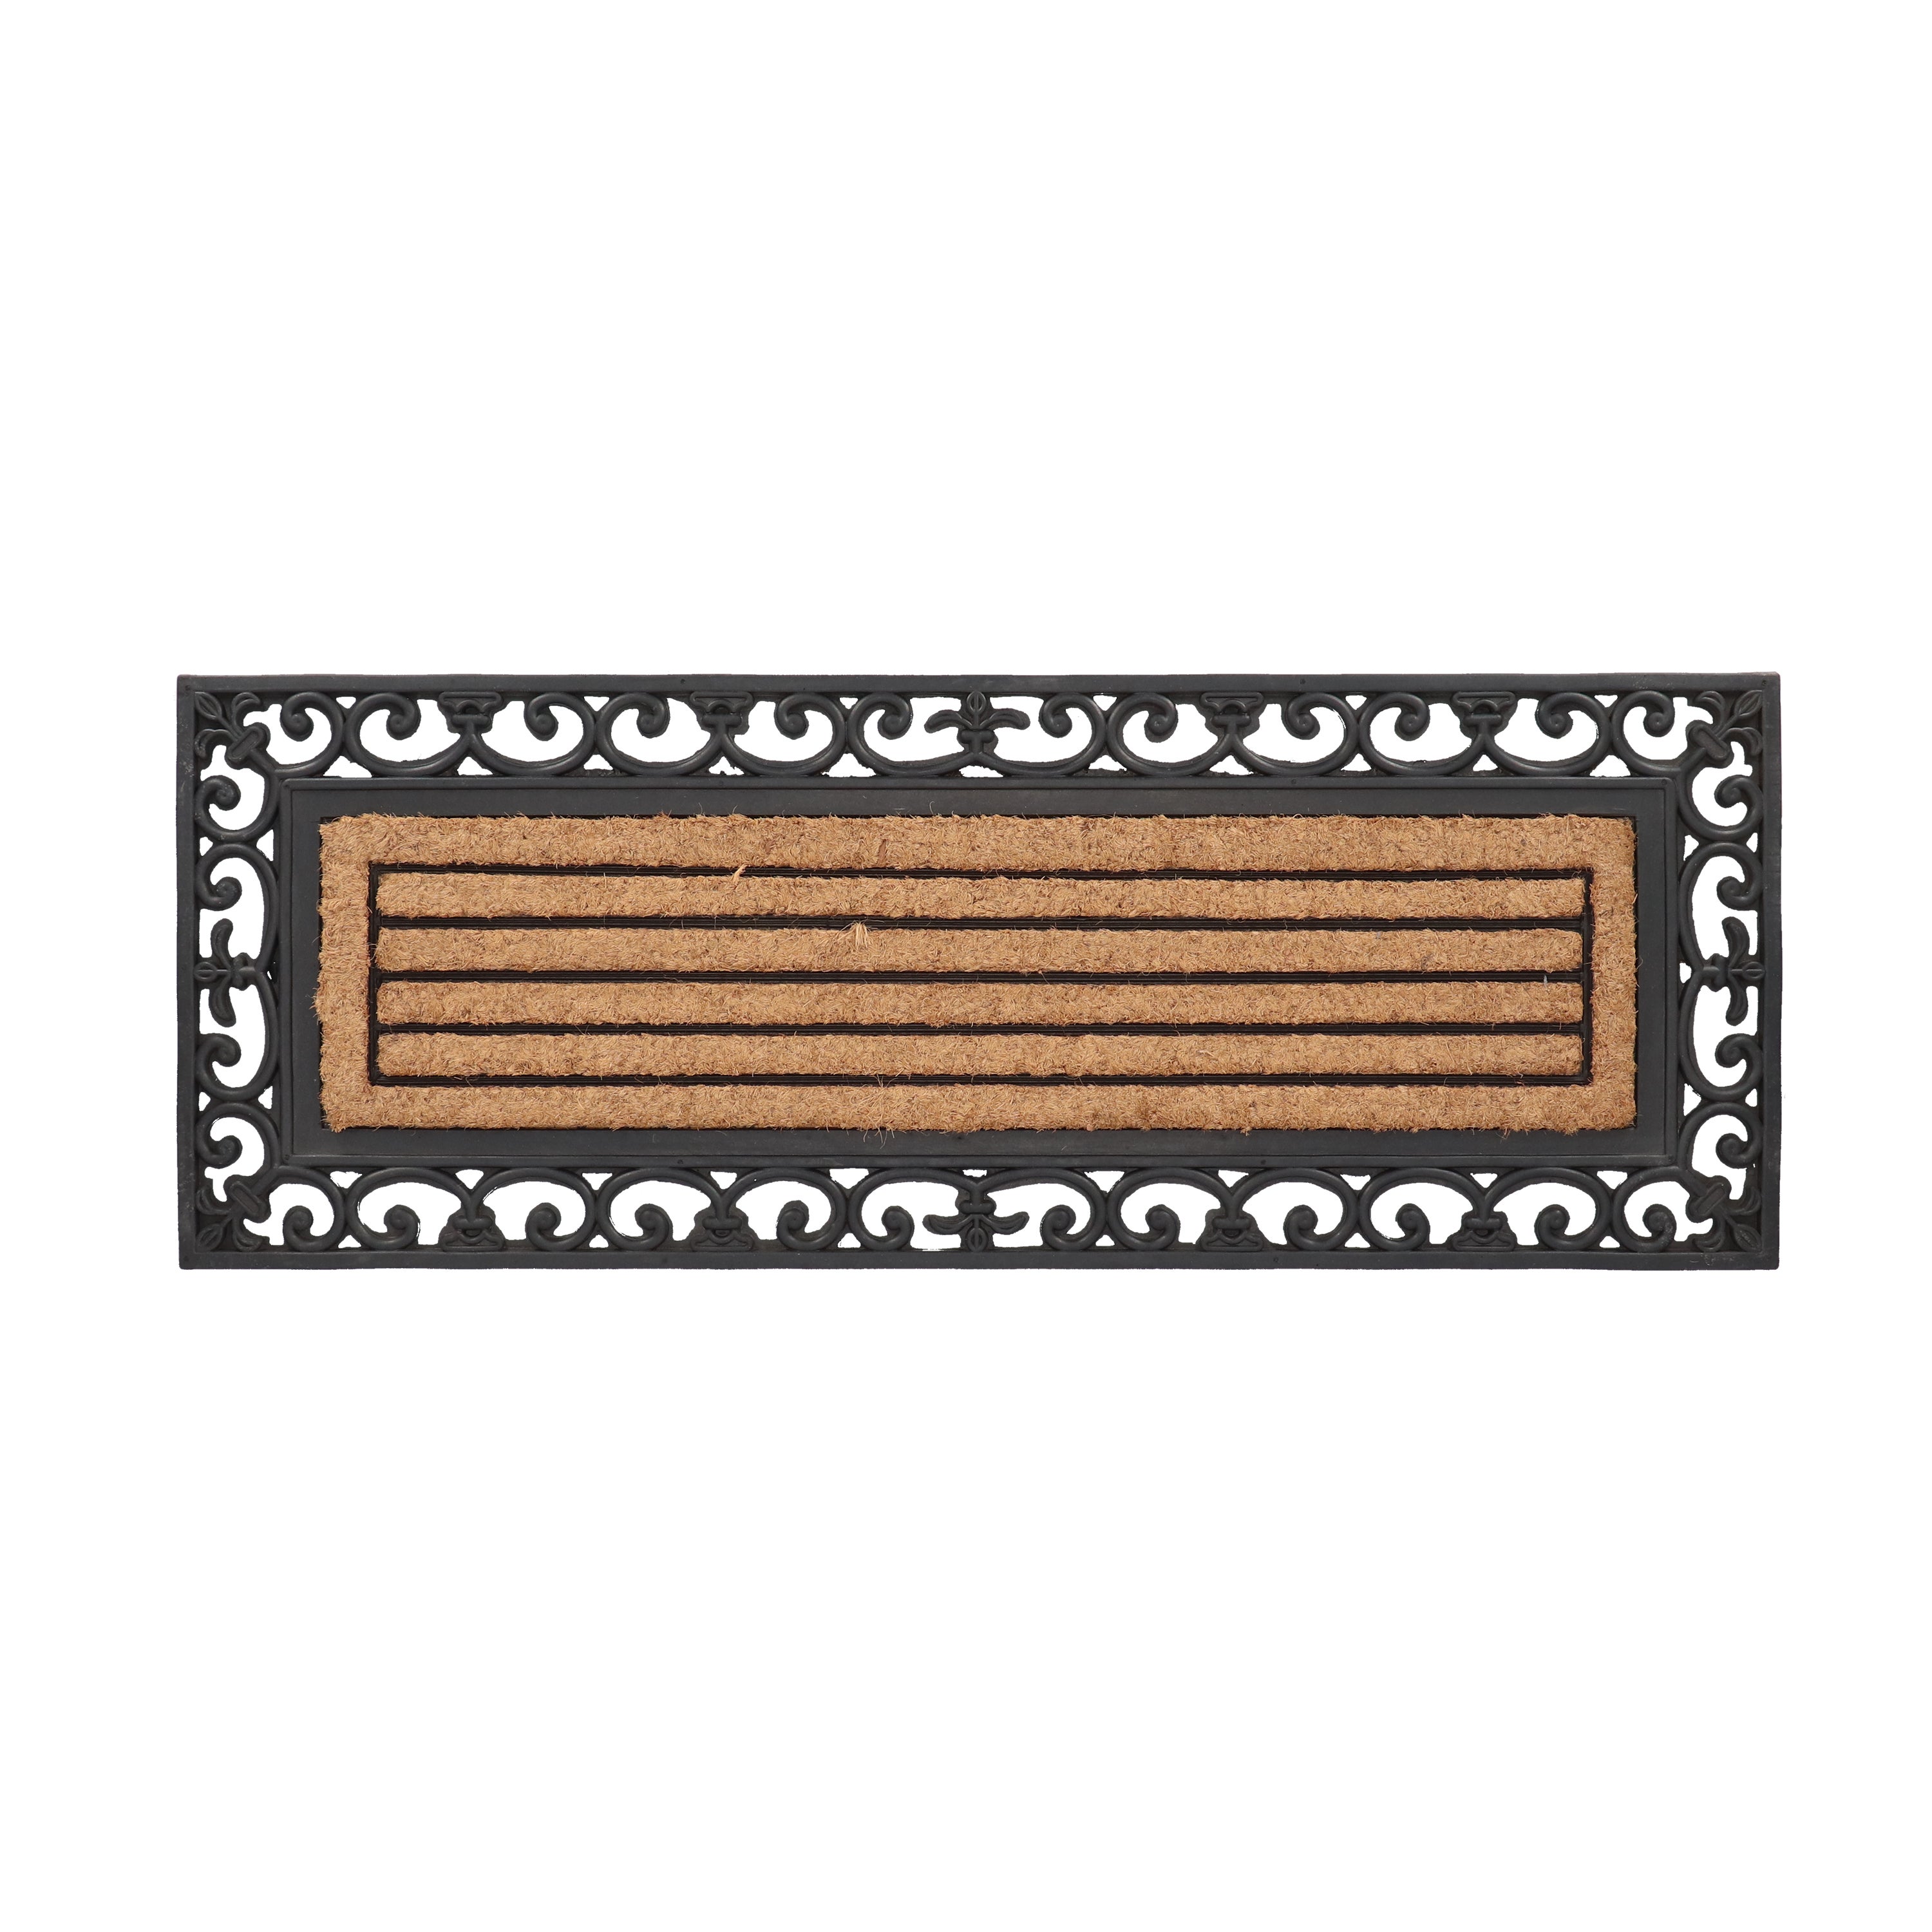 Photos - Area Rug A&D Large Rubber and Coir Doormat Brown 